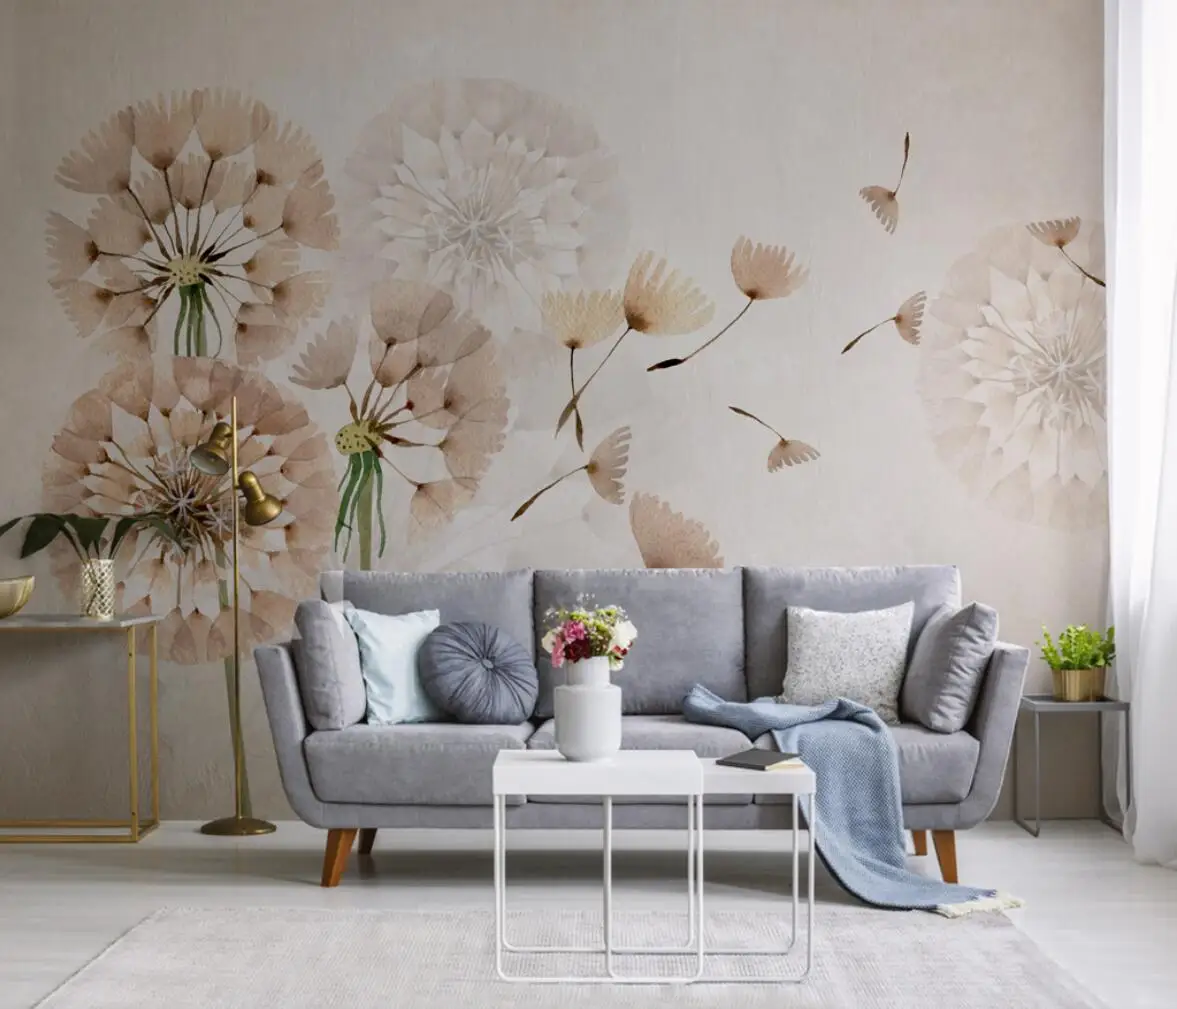 Custom papel de parede 3D Mural Wallpaper Oil Painting TV Background Wall Papers Home Decor wallpapers for Living Room Bedroom peacock feather photo wallpaper mural 3d living room bedroom home decor murals 3d wallpaper papel de parede mural